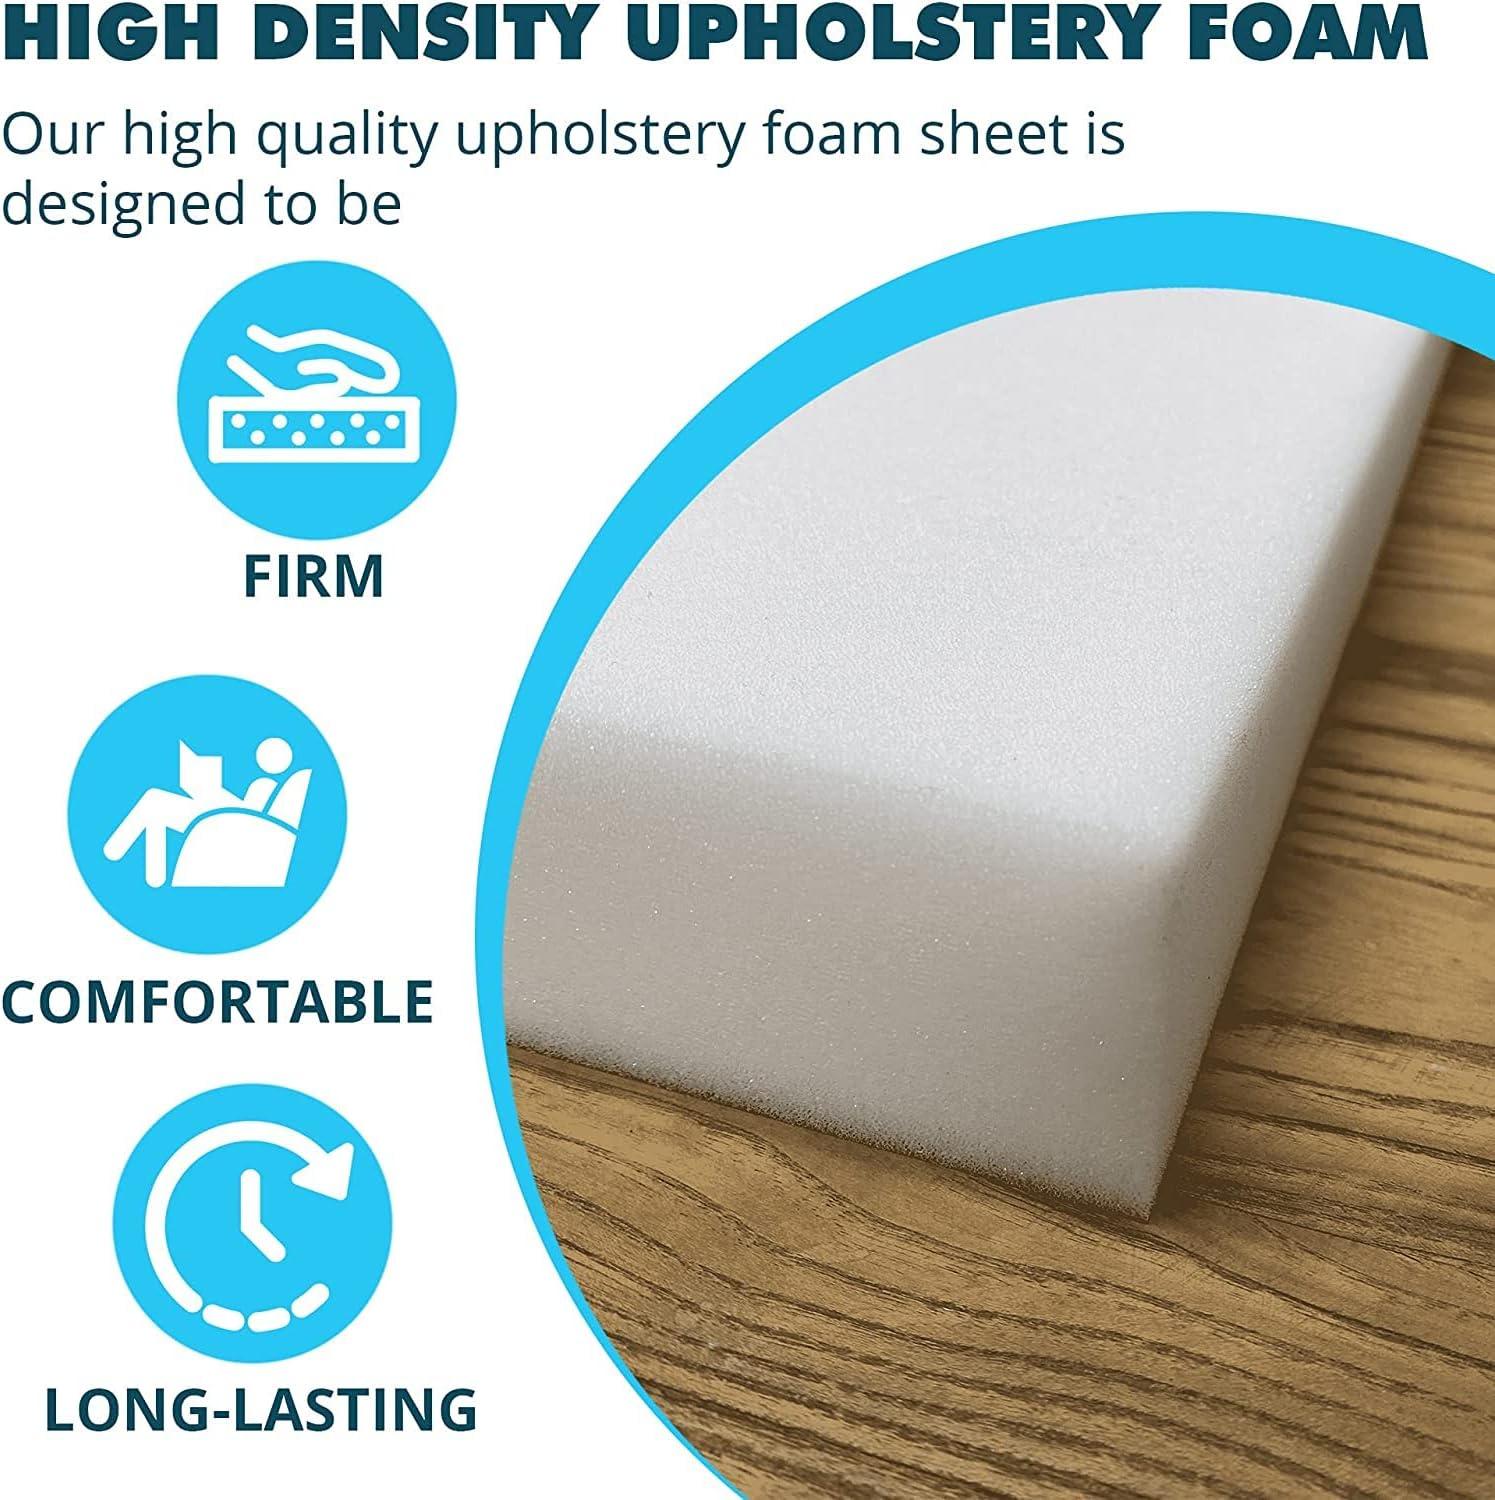  Foamma 5 x 14 x 14 High Density Upholstery Foam Padding,  Thick-Custom Pillow, Chair, and Couch Cushion Replacement Foam, Craft Foam  Upholstery Supplies, Foam Pad for Cushions and Seat Repair 